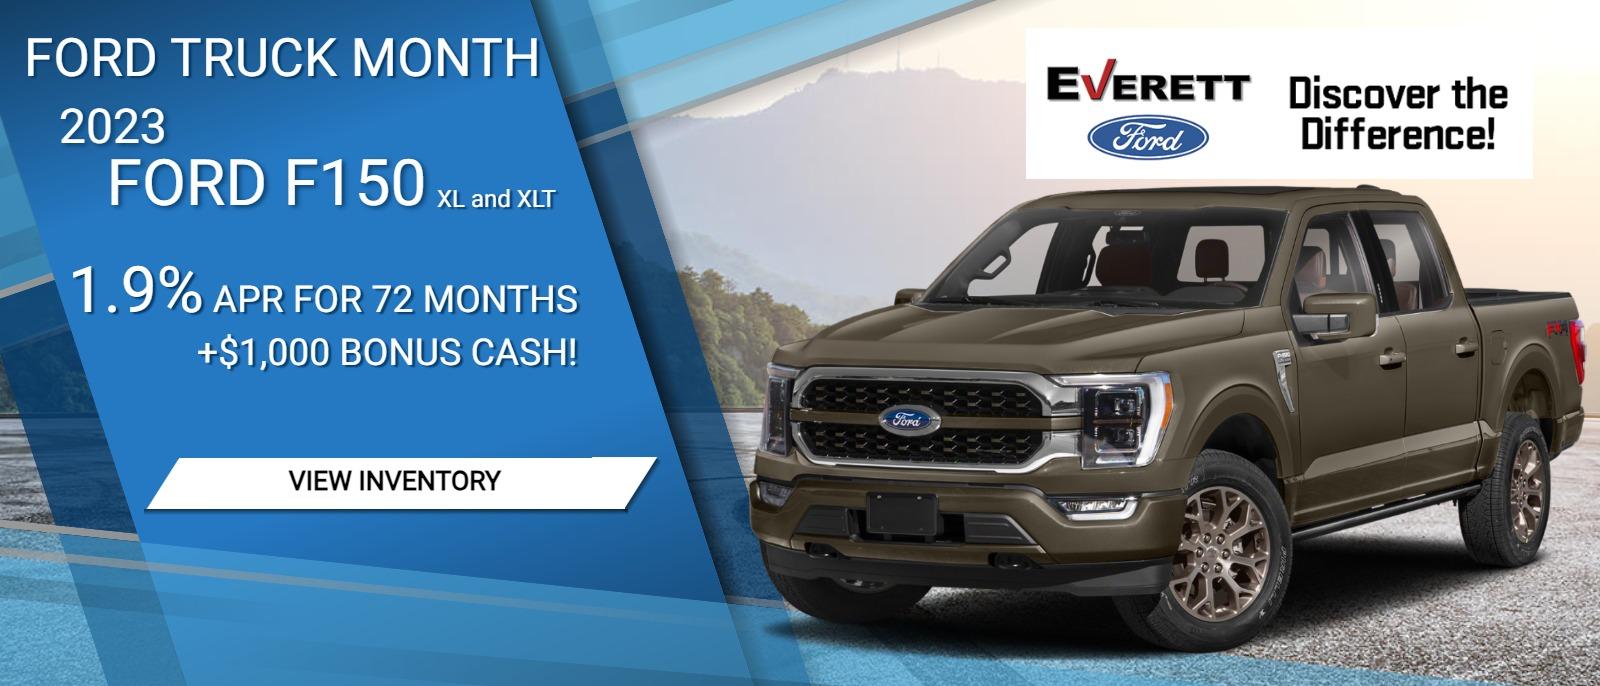 Ford Truck Month
2023 Ford F150
XL and XLT
1.9% APR for 72 months
+$1,000 Bonus Cash!